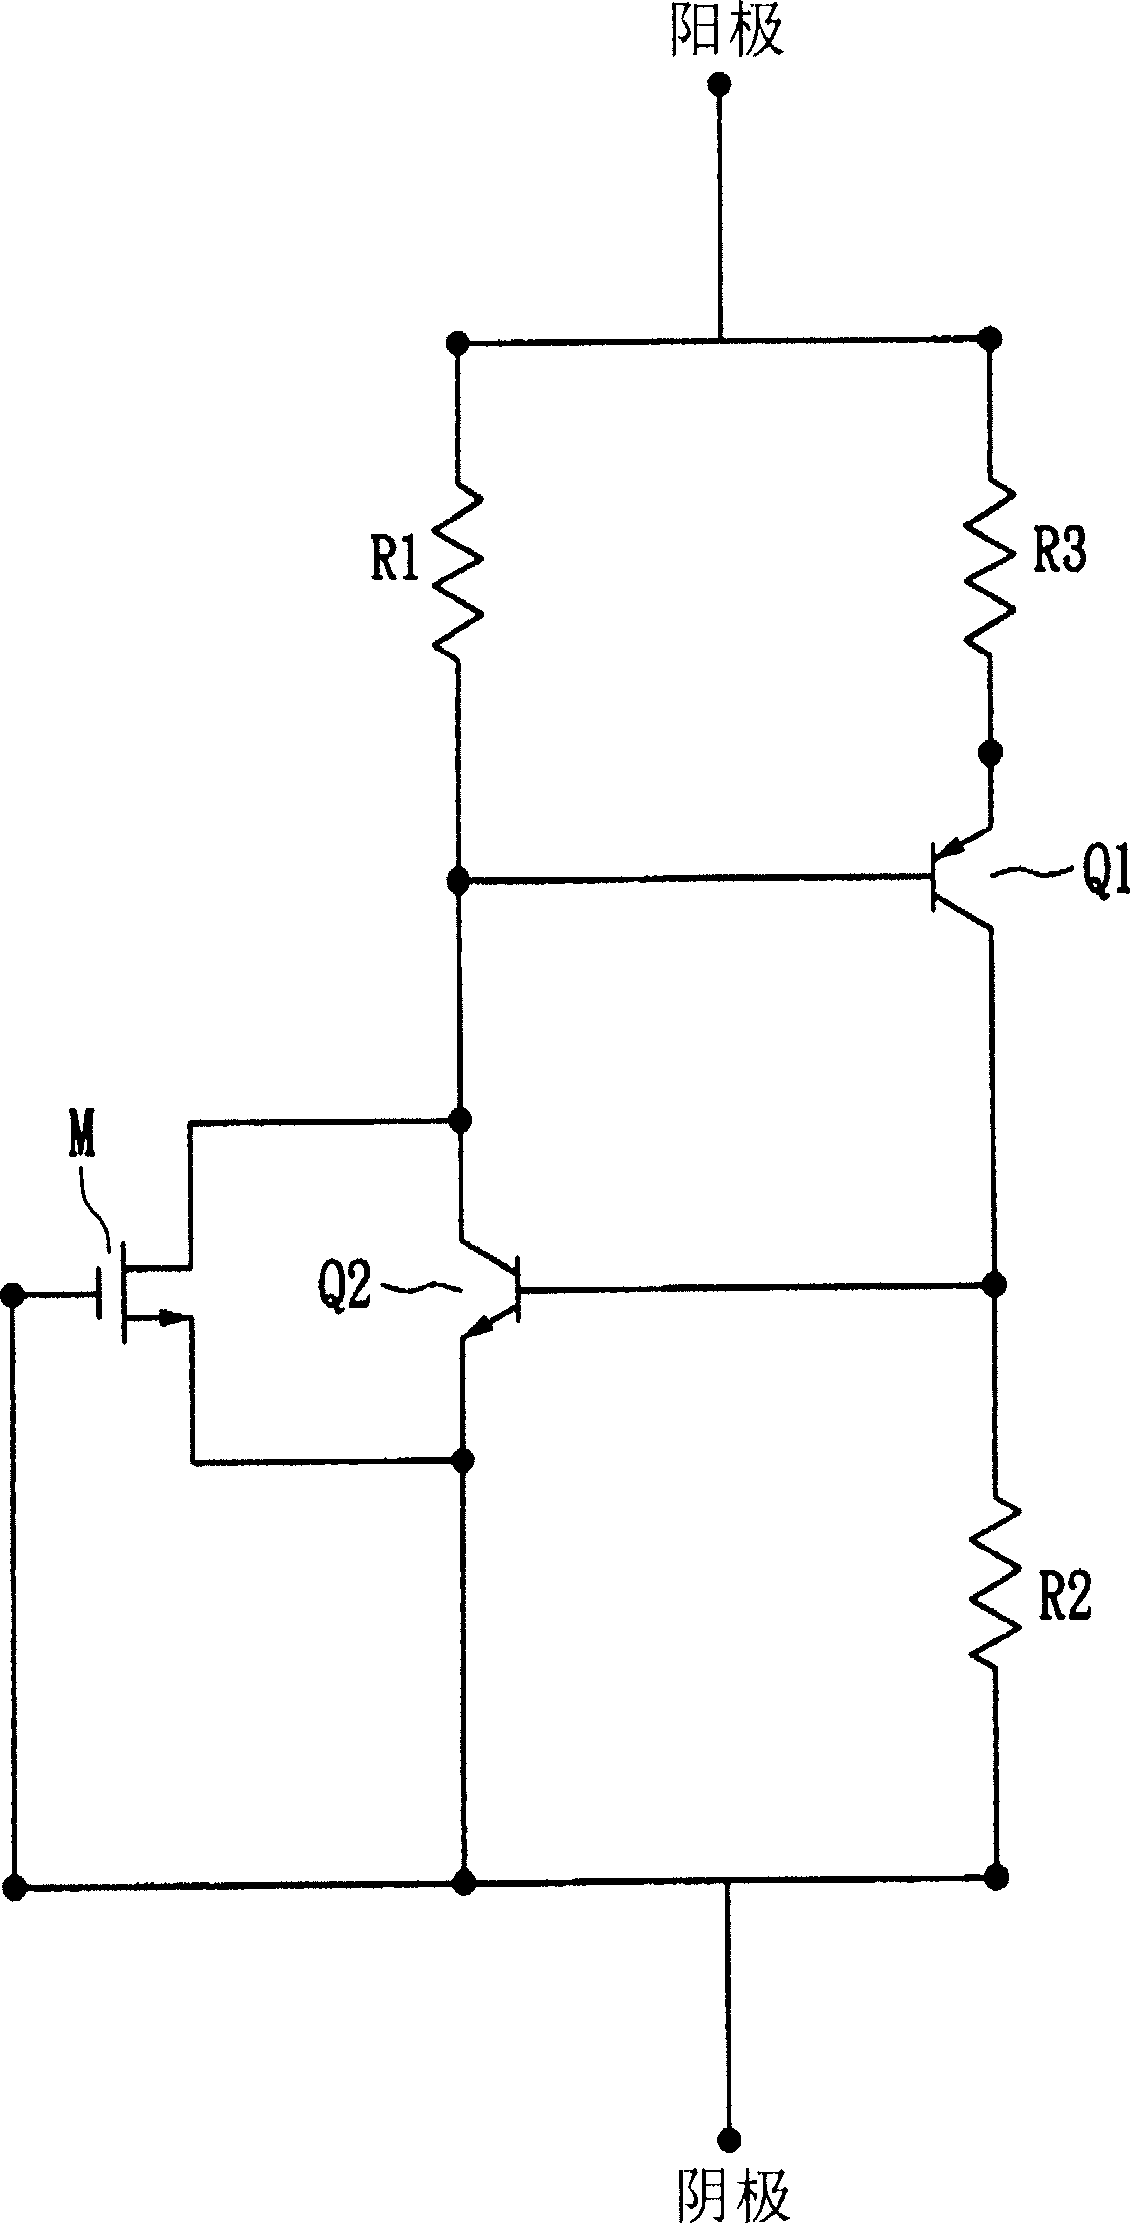 Low trigger voltage silicon control rectifier and its circuit